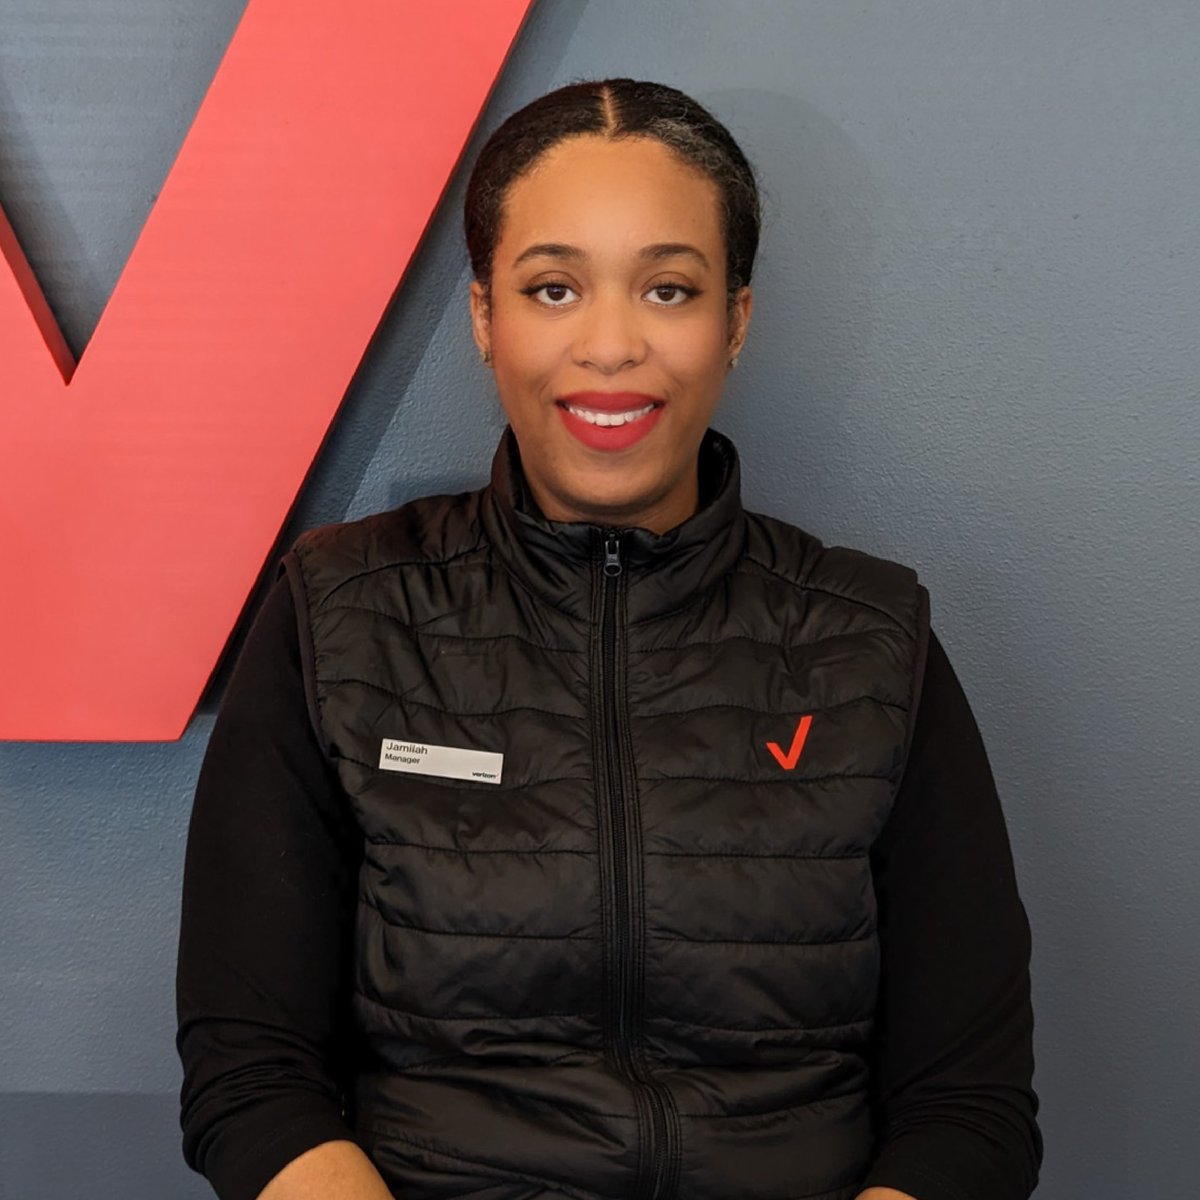 Caring for others. That’s Jamilah Carter’s #WhyVerizon. As a Verizon Retail Manager, being there for her team and customers keeps her motivated. Because of the support she’s received, she’s dedicated her career to supporting others. 👏 Join Verizon Retail: vz.to/3NUEFa2